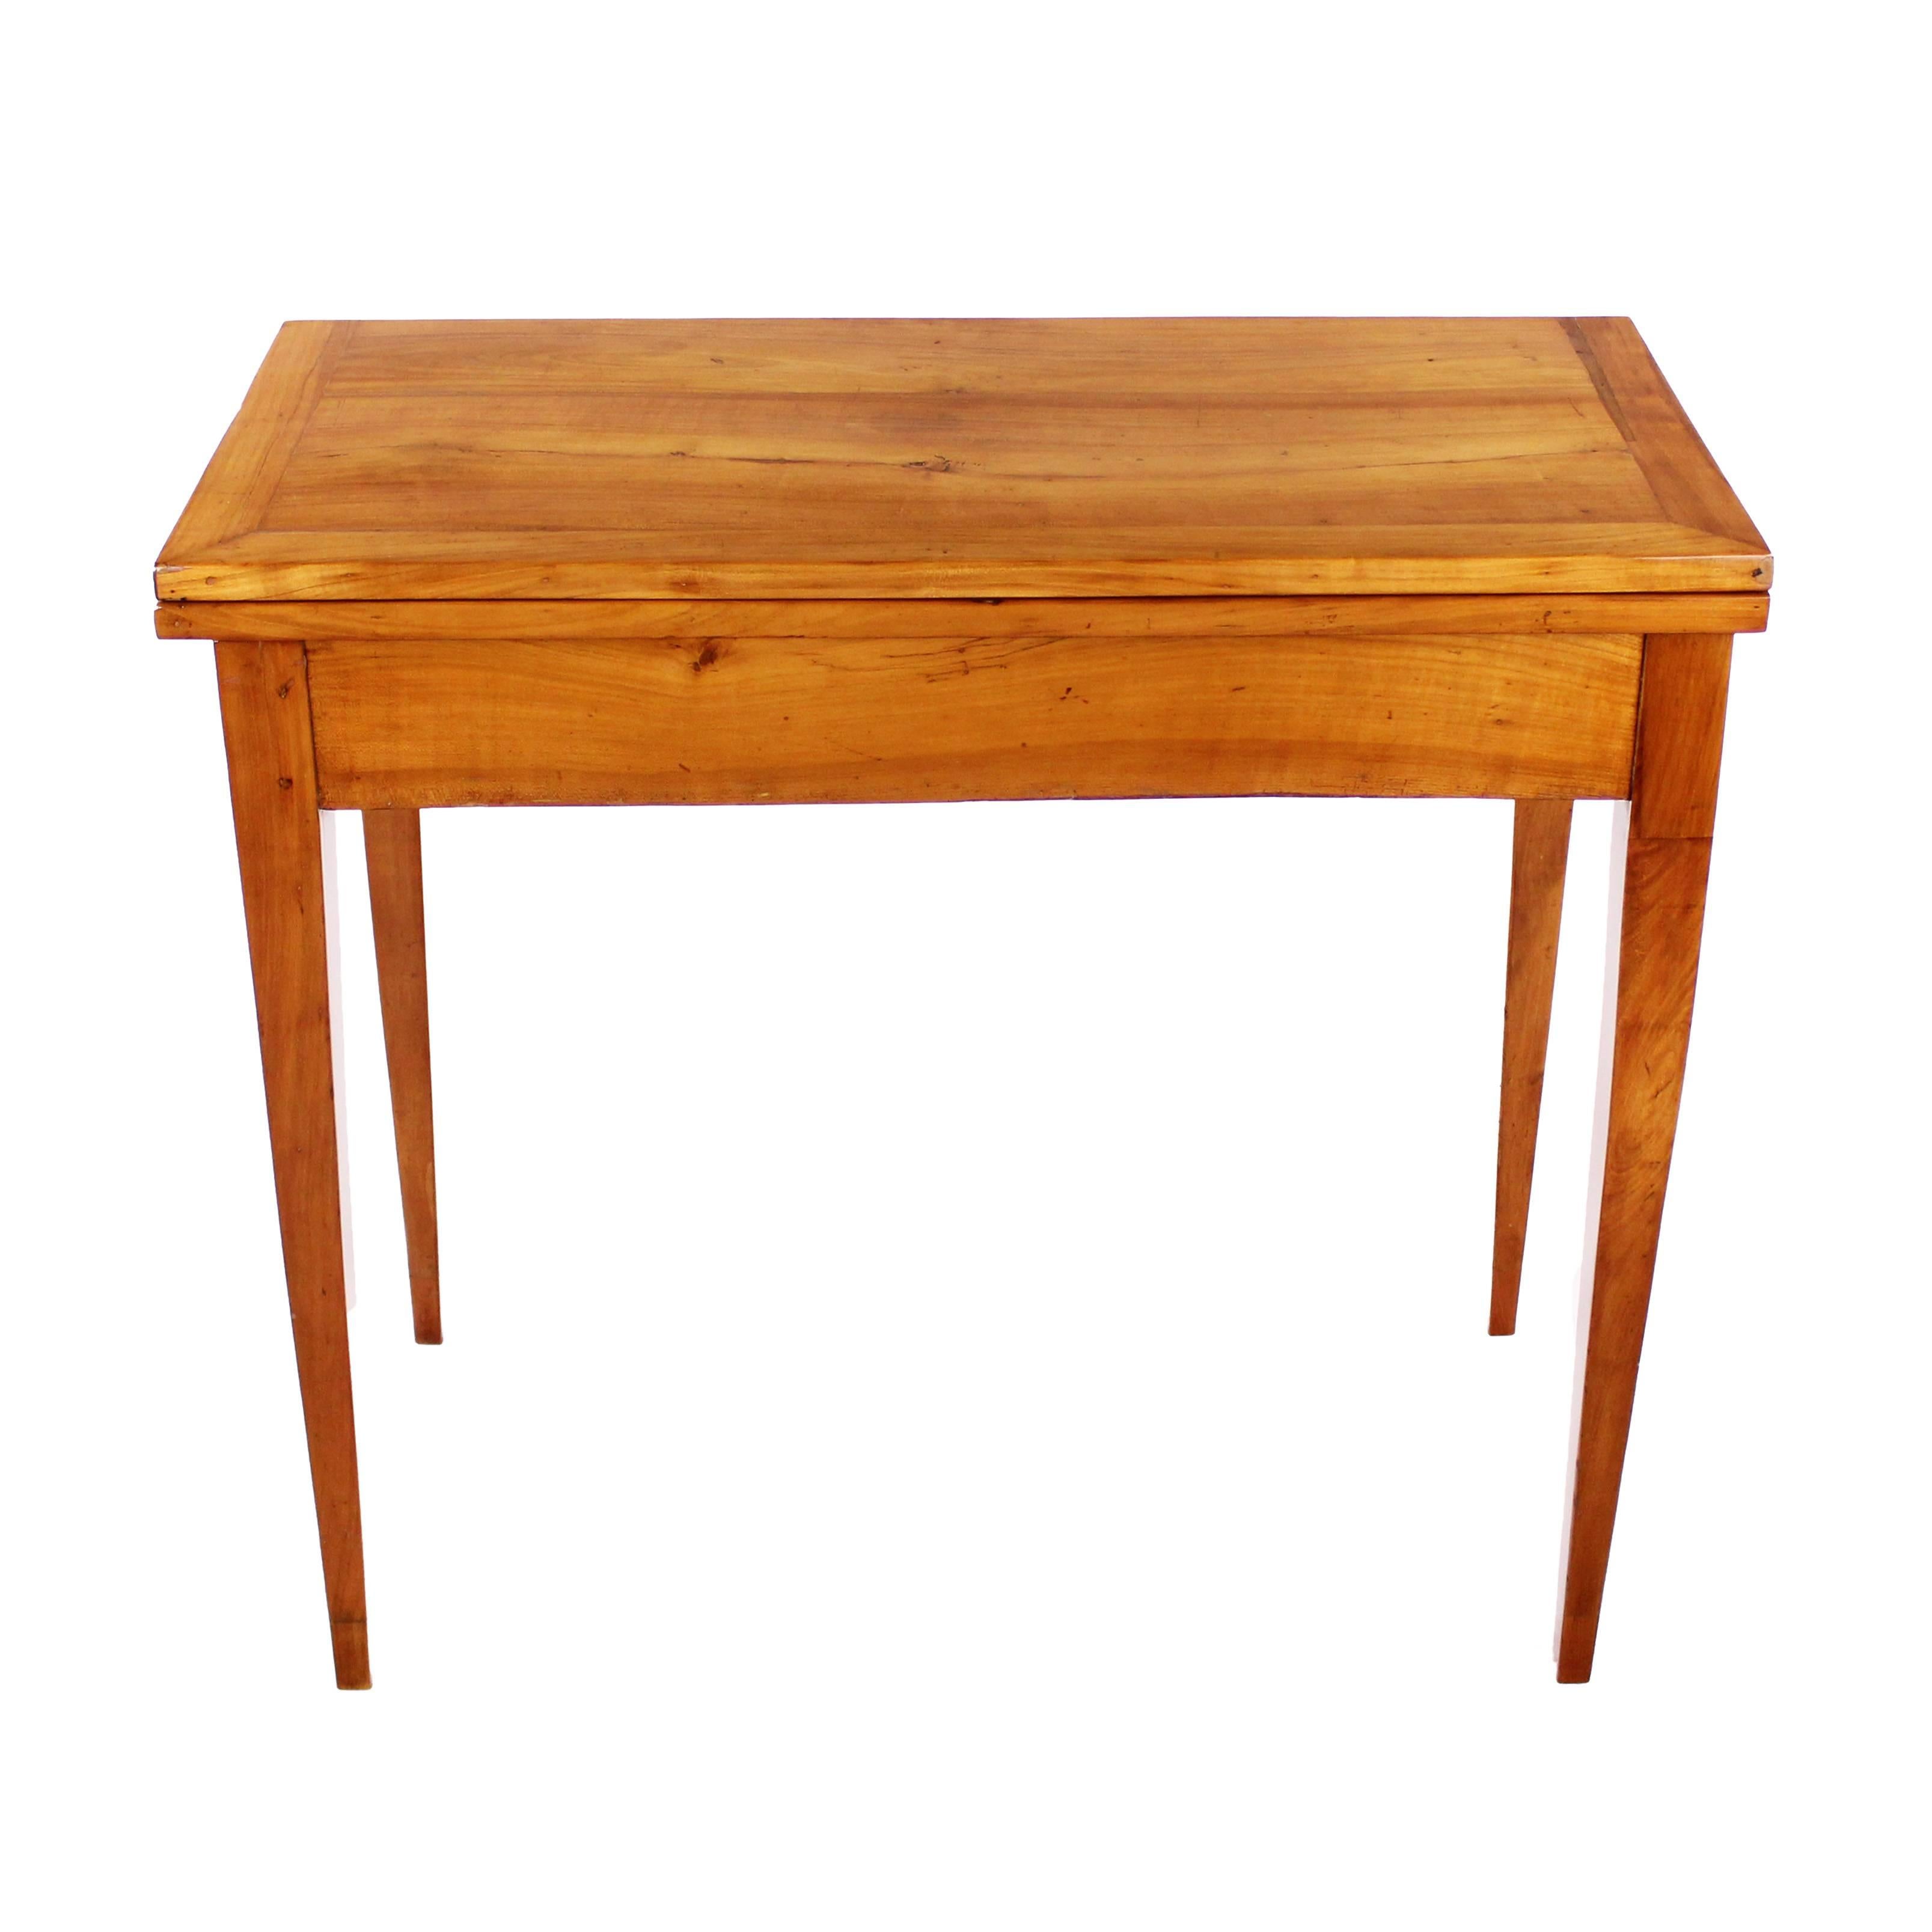 Console table, Biedermeier
Cherry tree, circa 1830-1840
Open and swivelling
Inside with leather
Restored residential-ready state
French shellac hand polish
Height: 76.5 cm, width: 84 cm, depth: 40 and 81 cm

Delivery can be made to your door